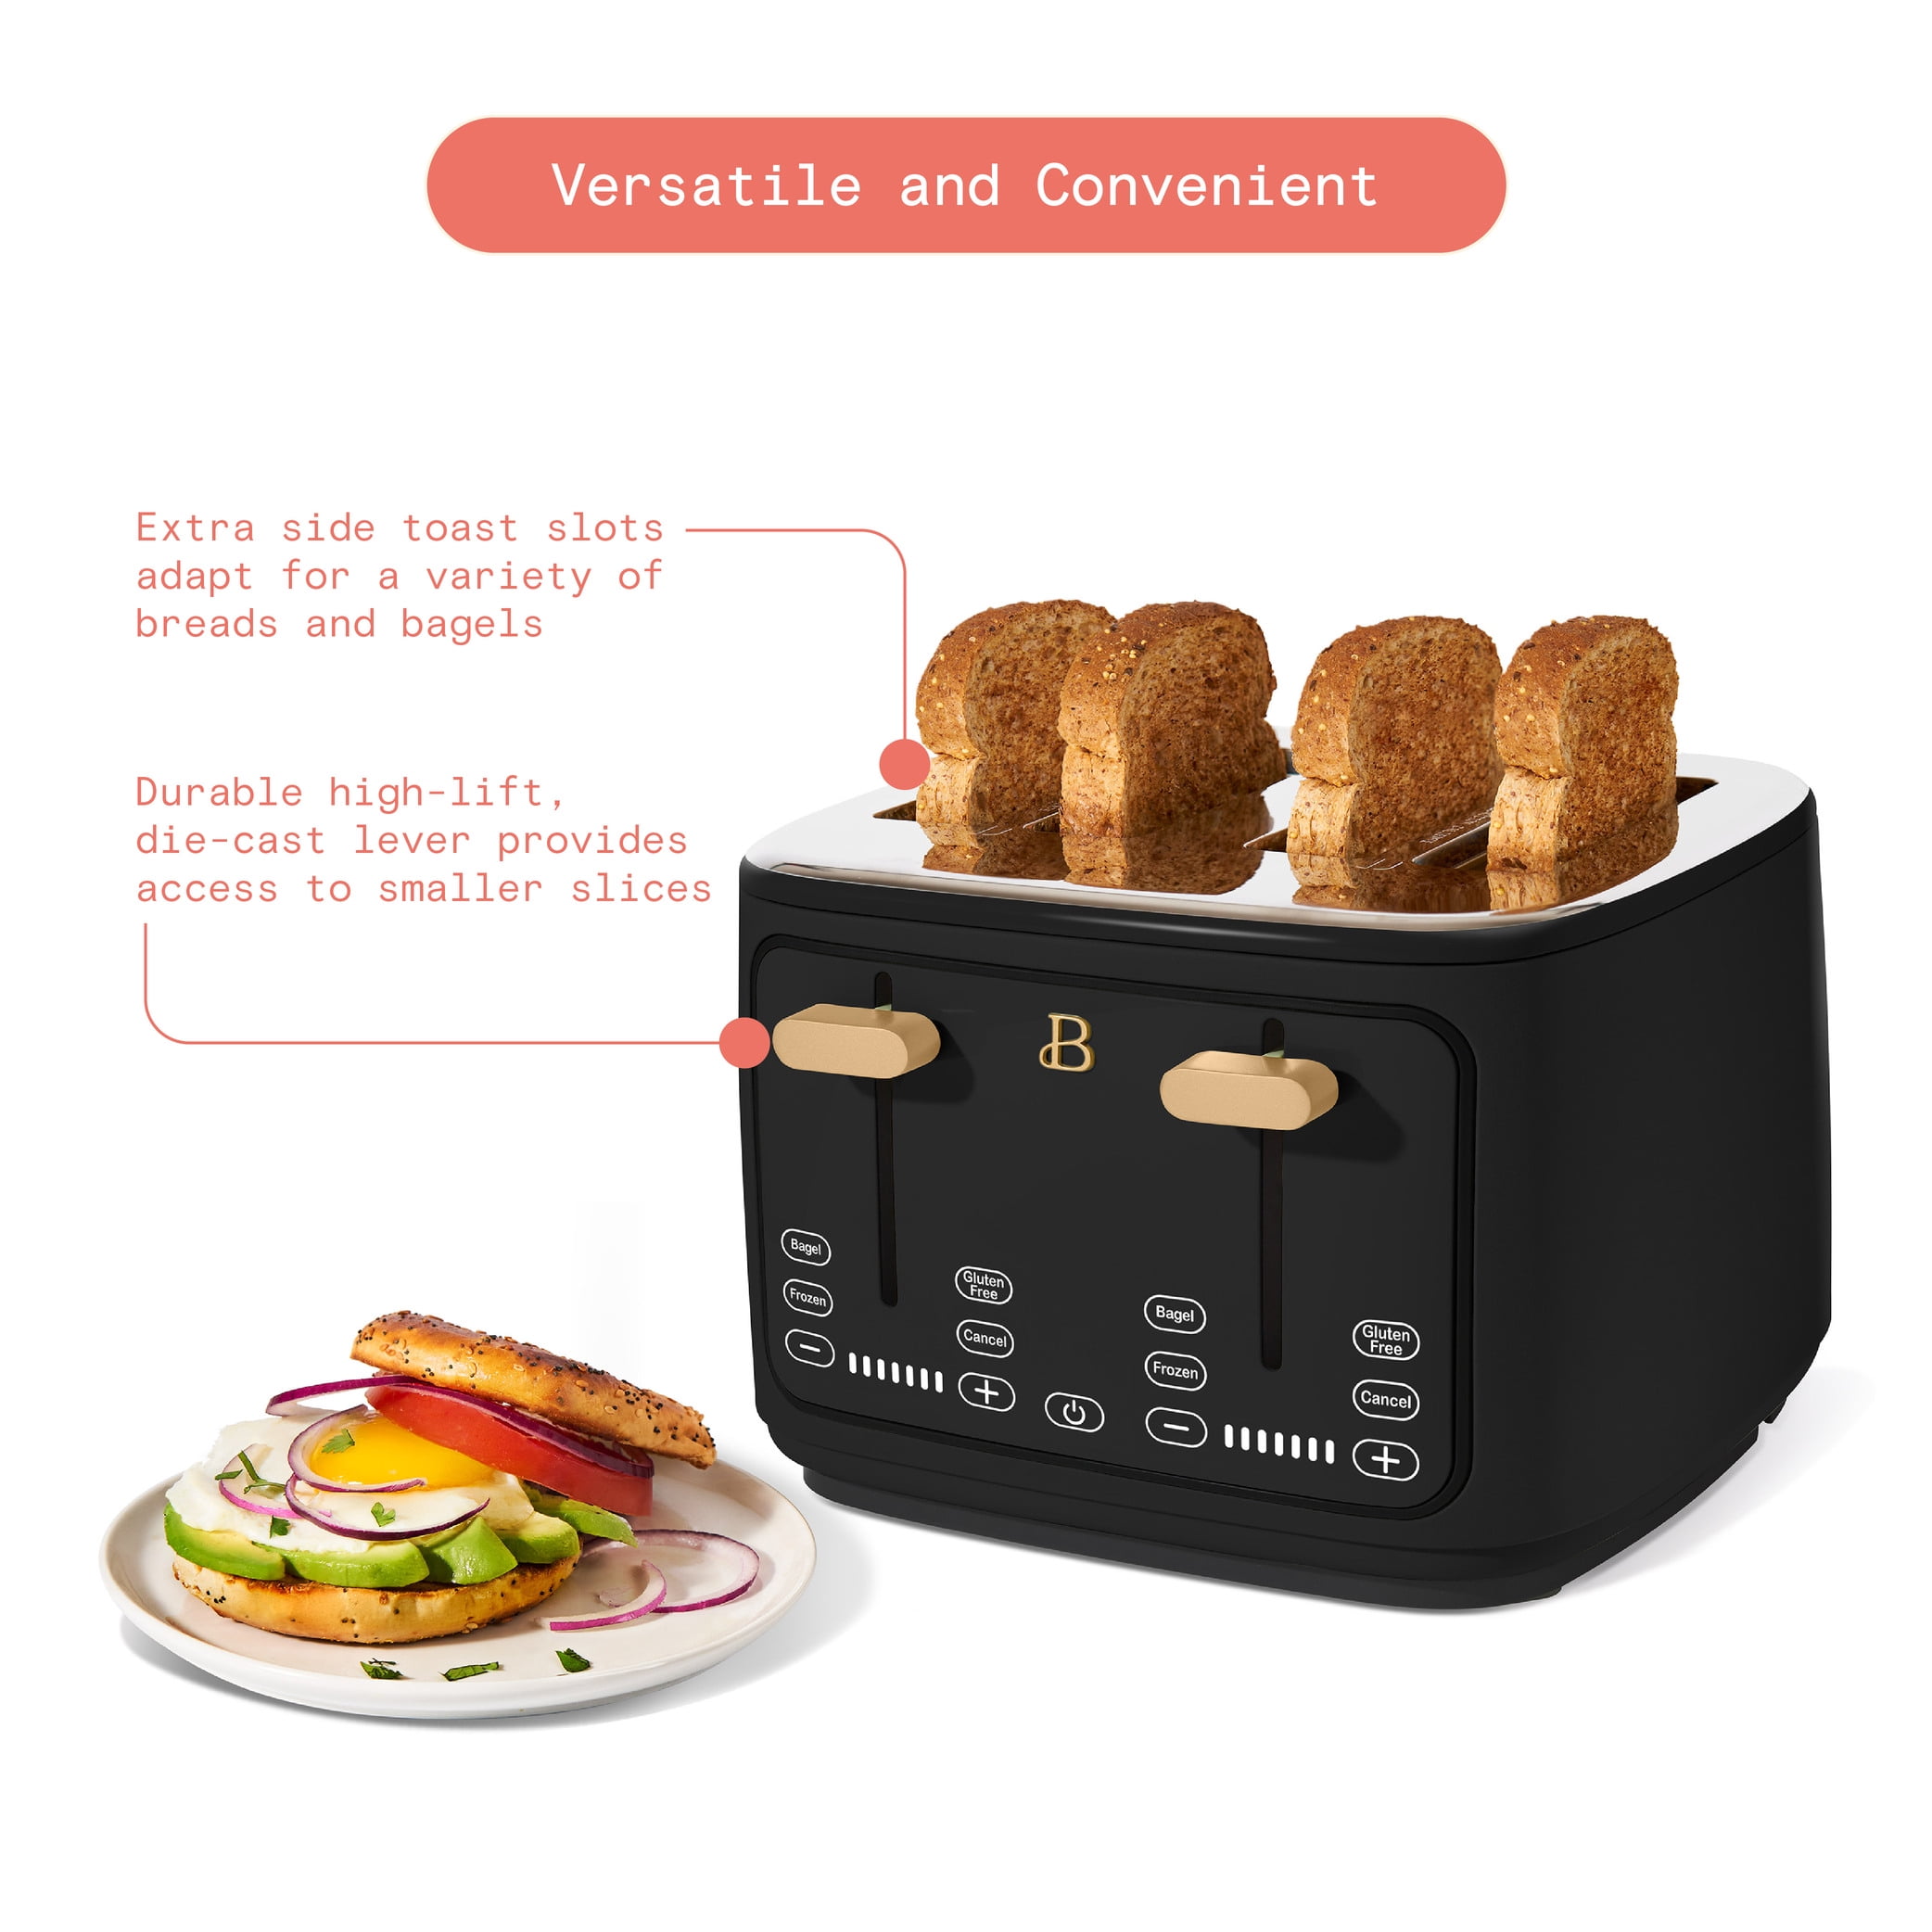 Kalorik® 4-Slice Toaster with Full Touch Screen Shade Selector